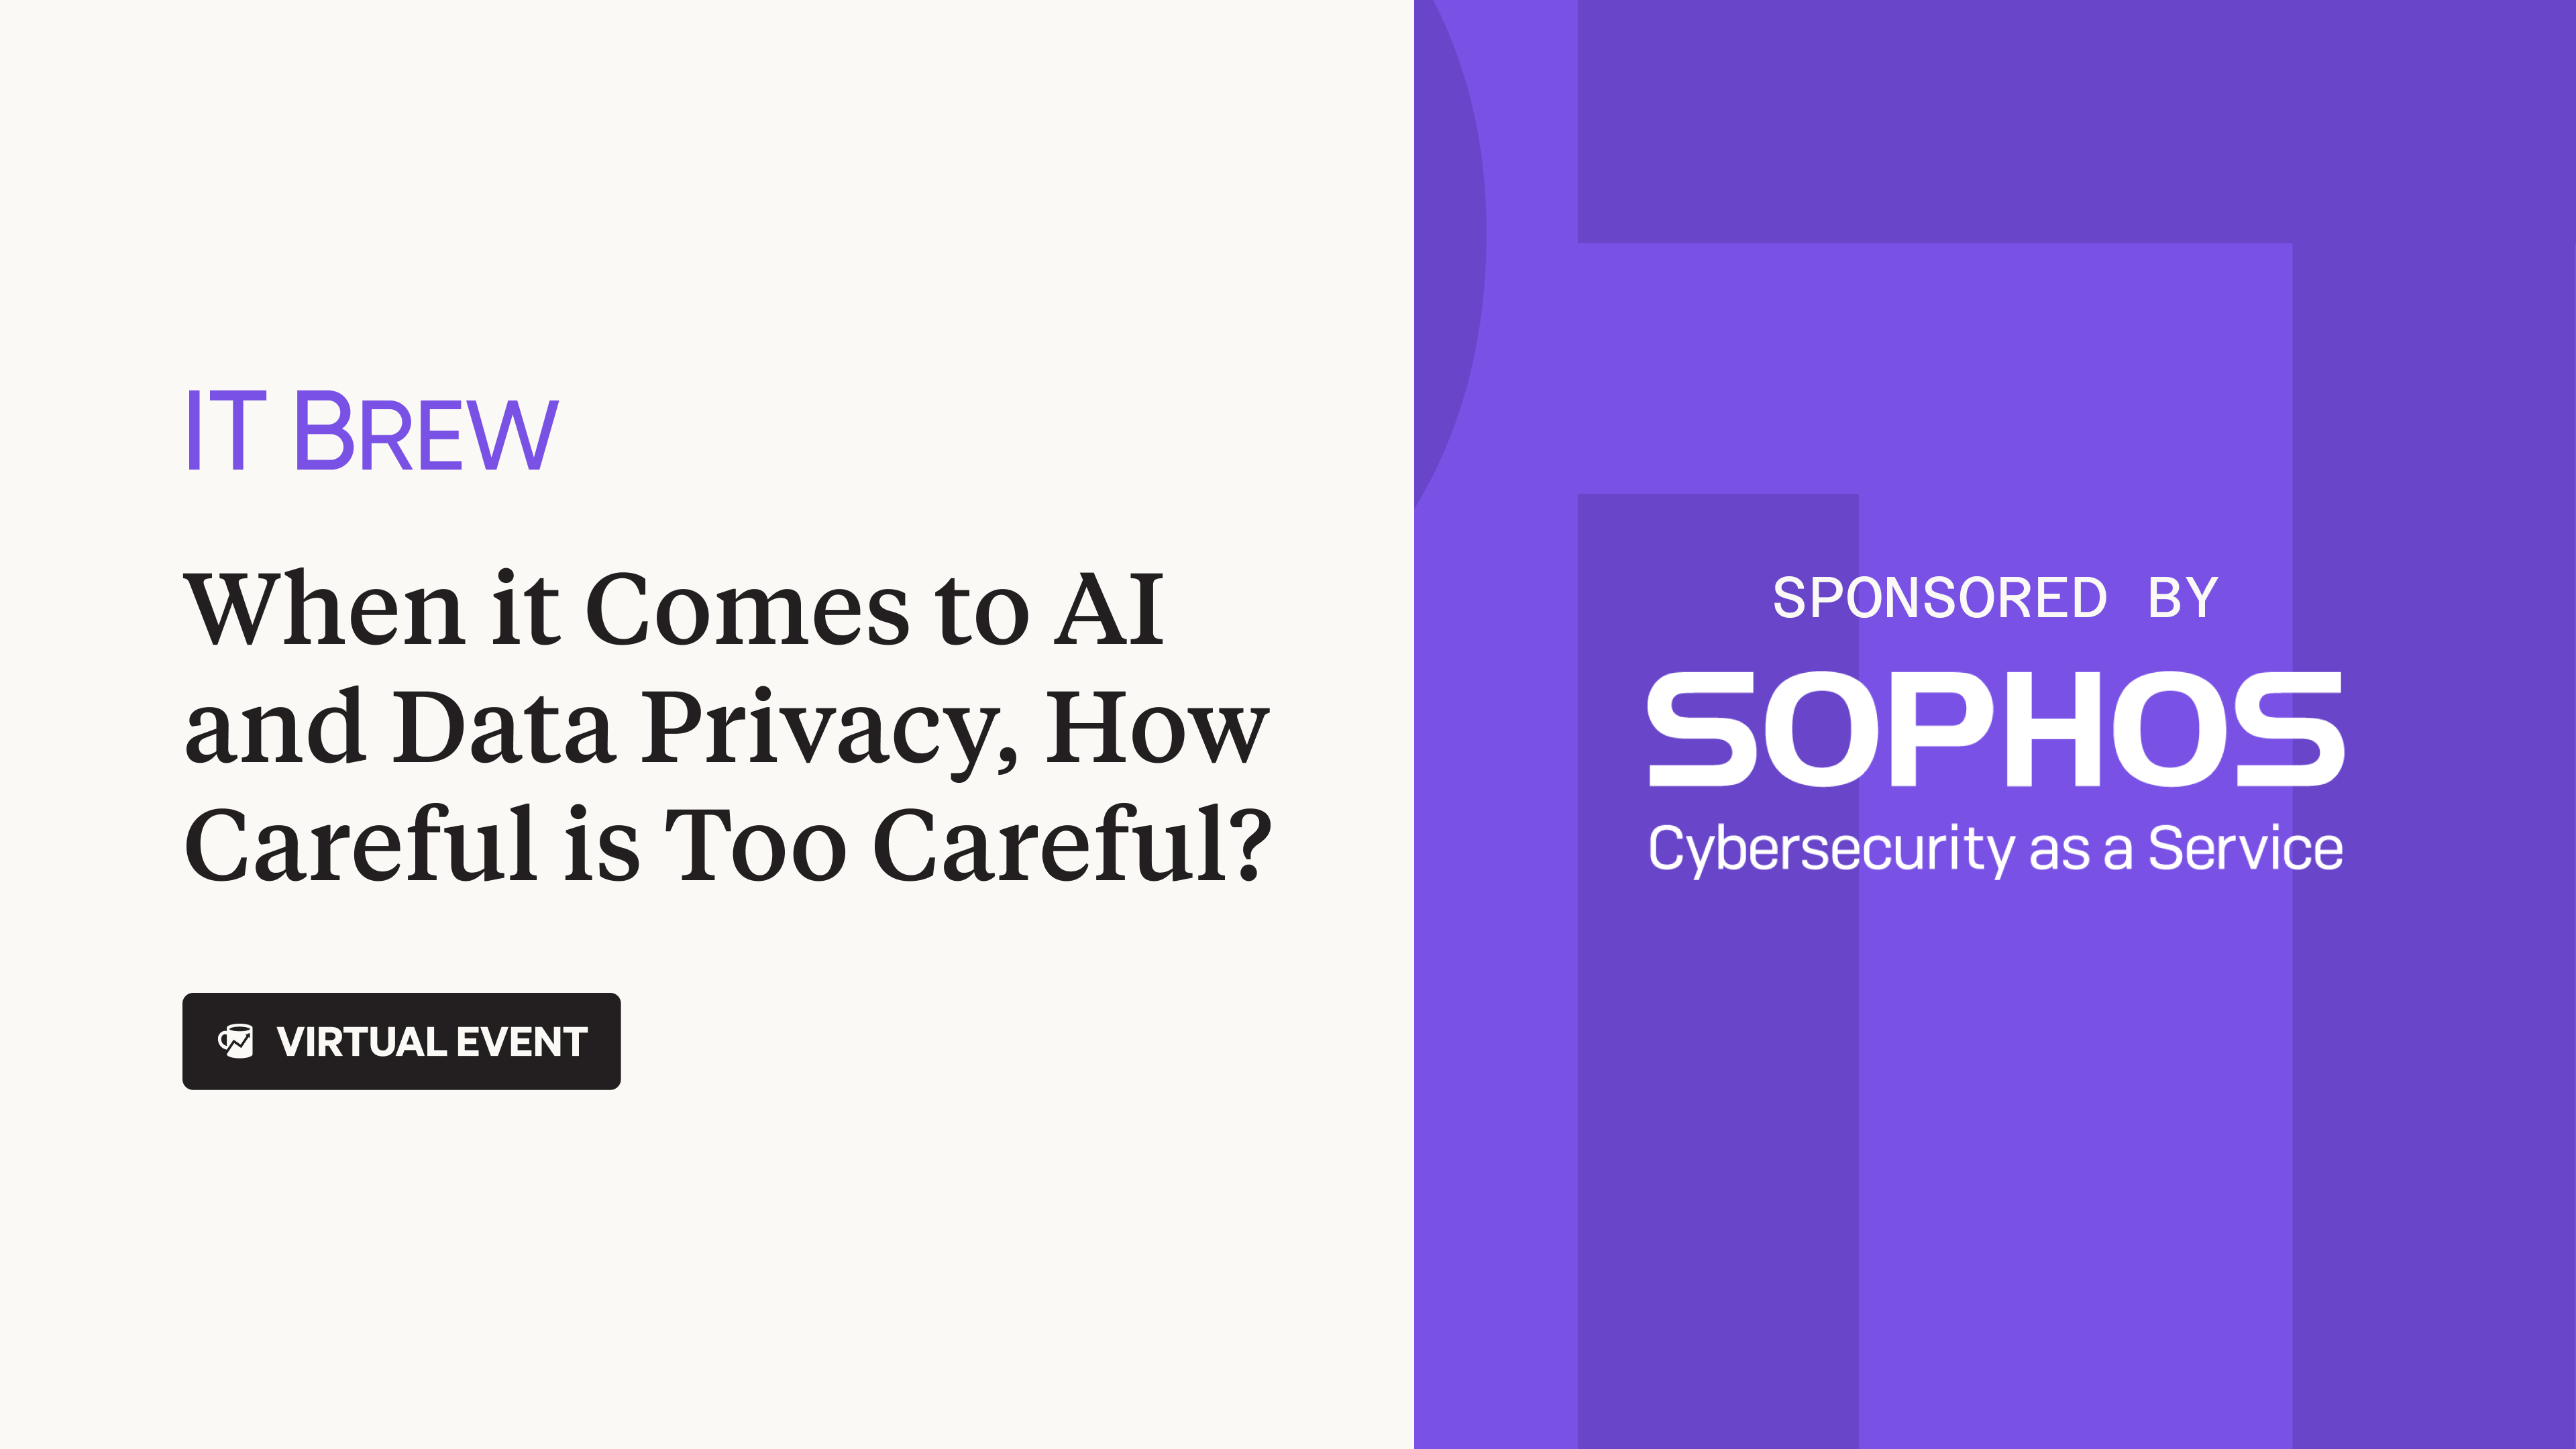 IT Brew virtual event “When it Comes to AI and Data Privacy, How Careful is too Careful?